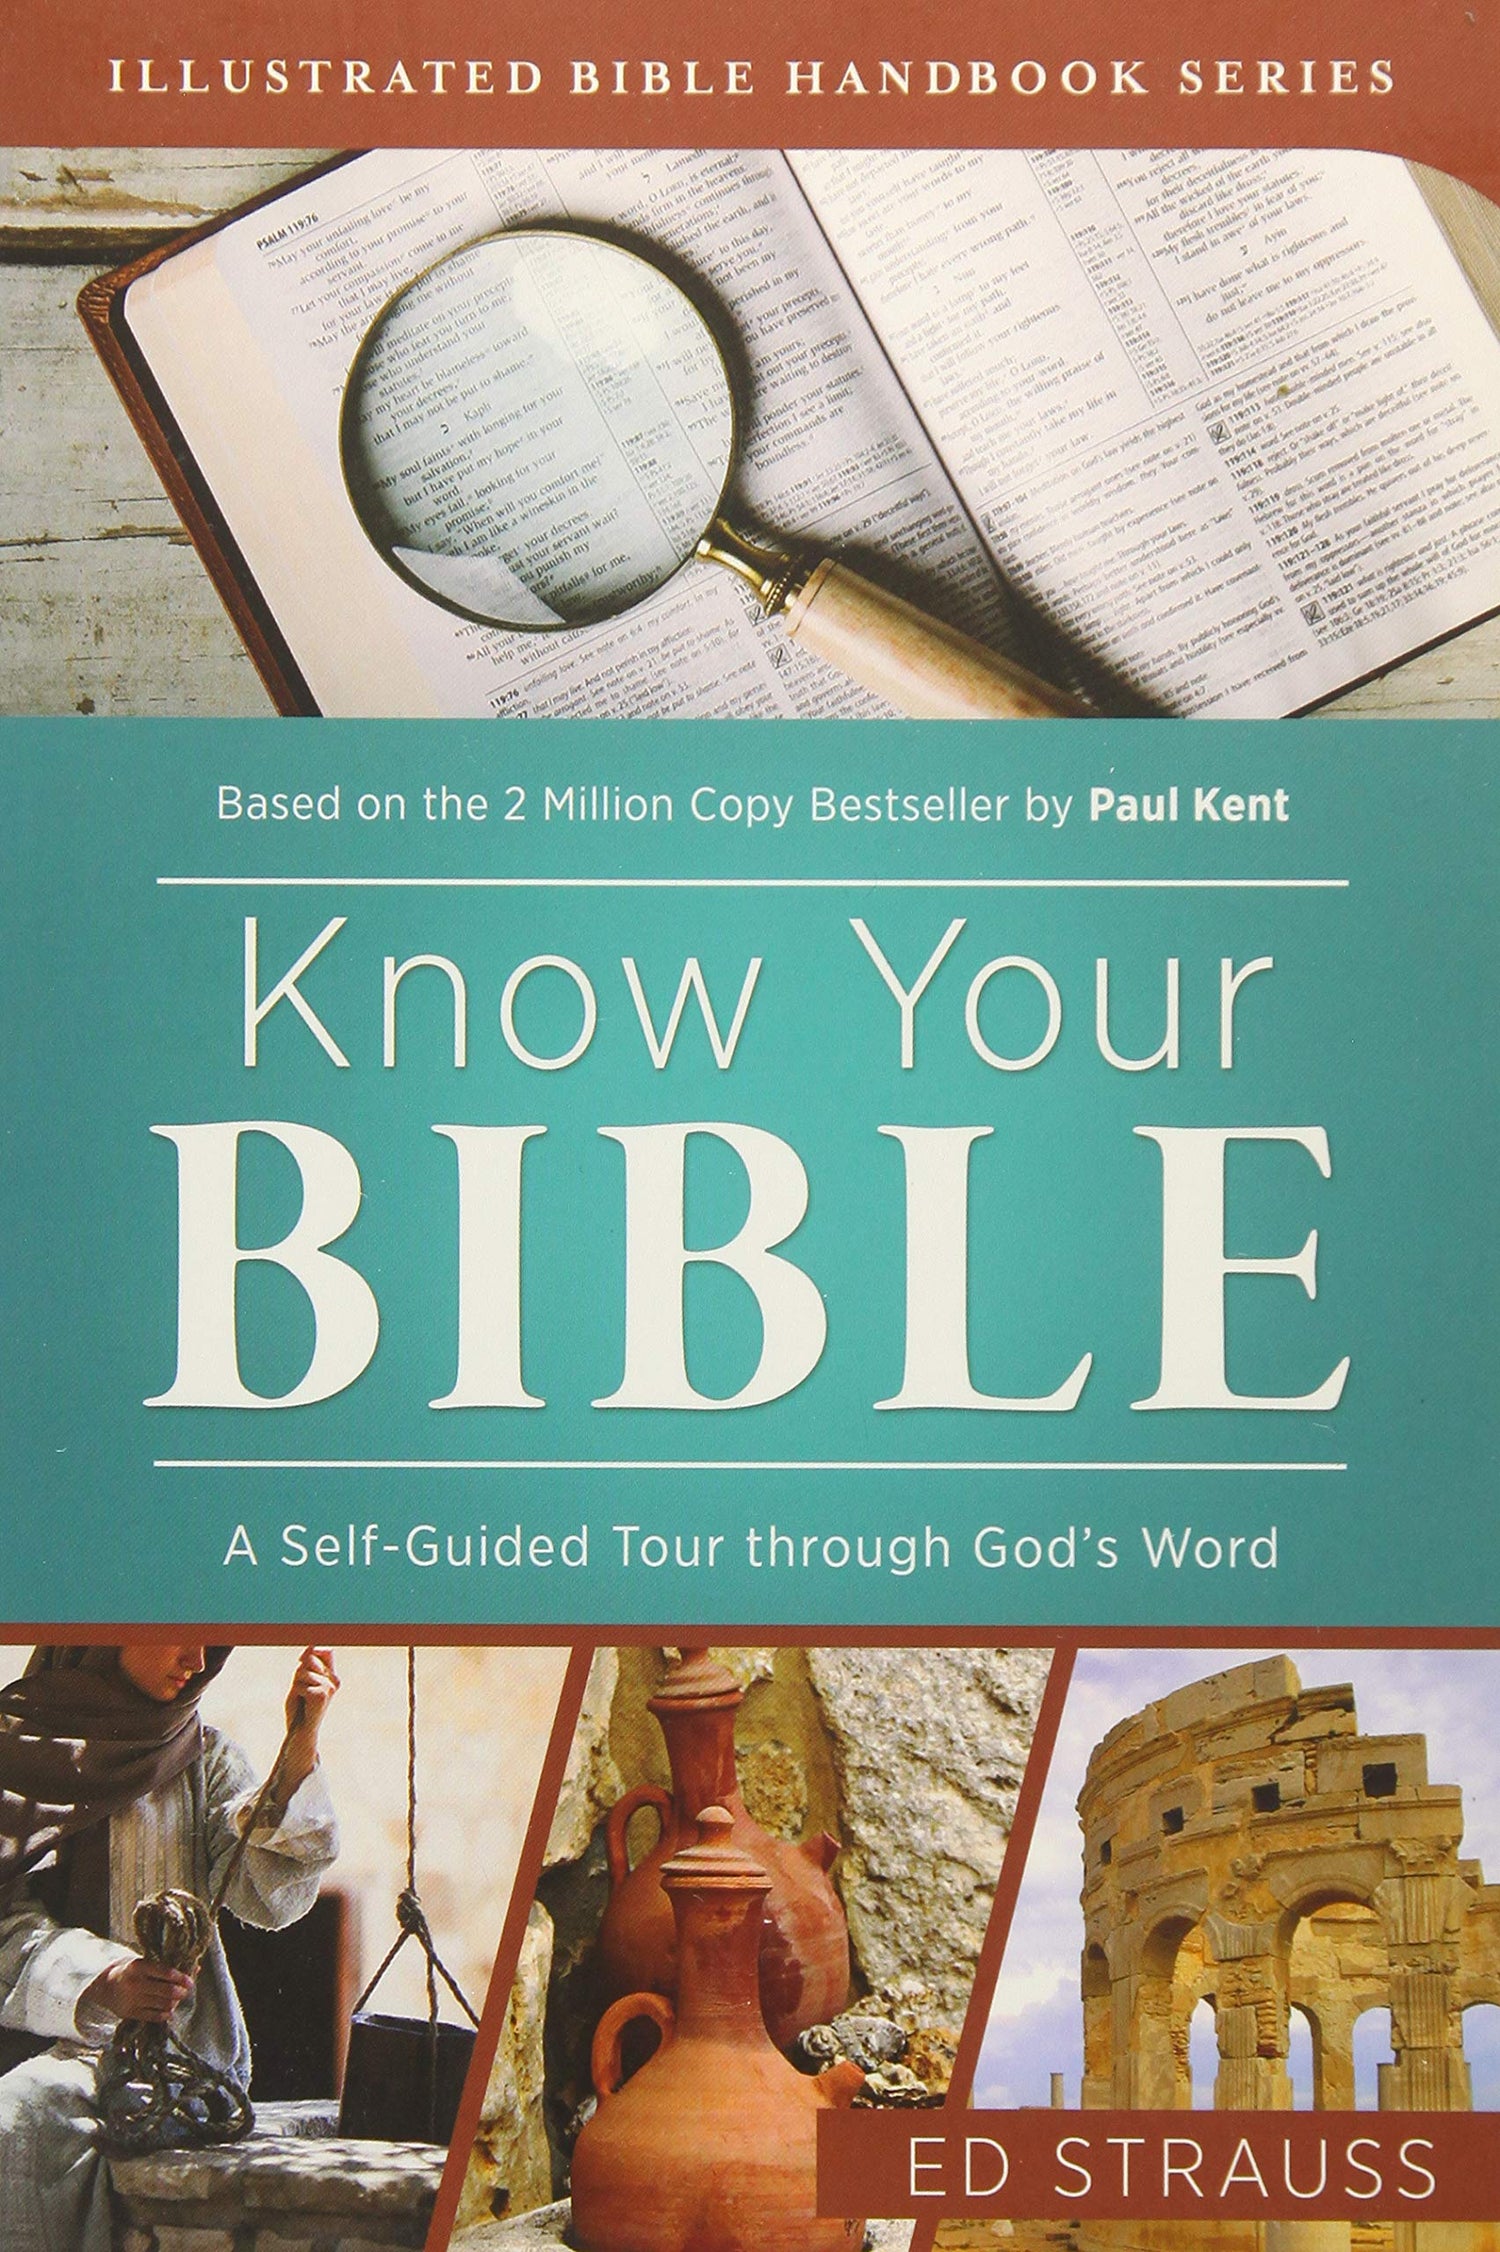 KNOW YOUR BIBLE: A SELF-GUIDED TOUR THROUGH GODS WORD (ILLUSTRATED BIBLE HANDBOOK SERIES)